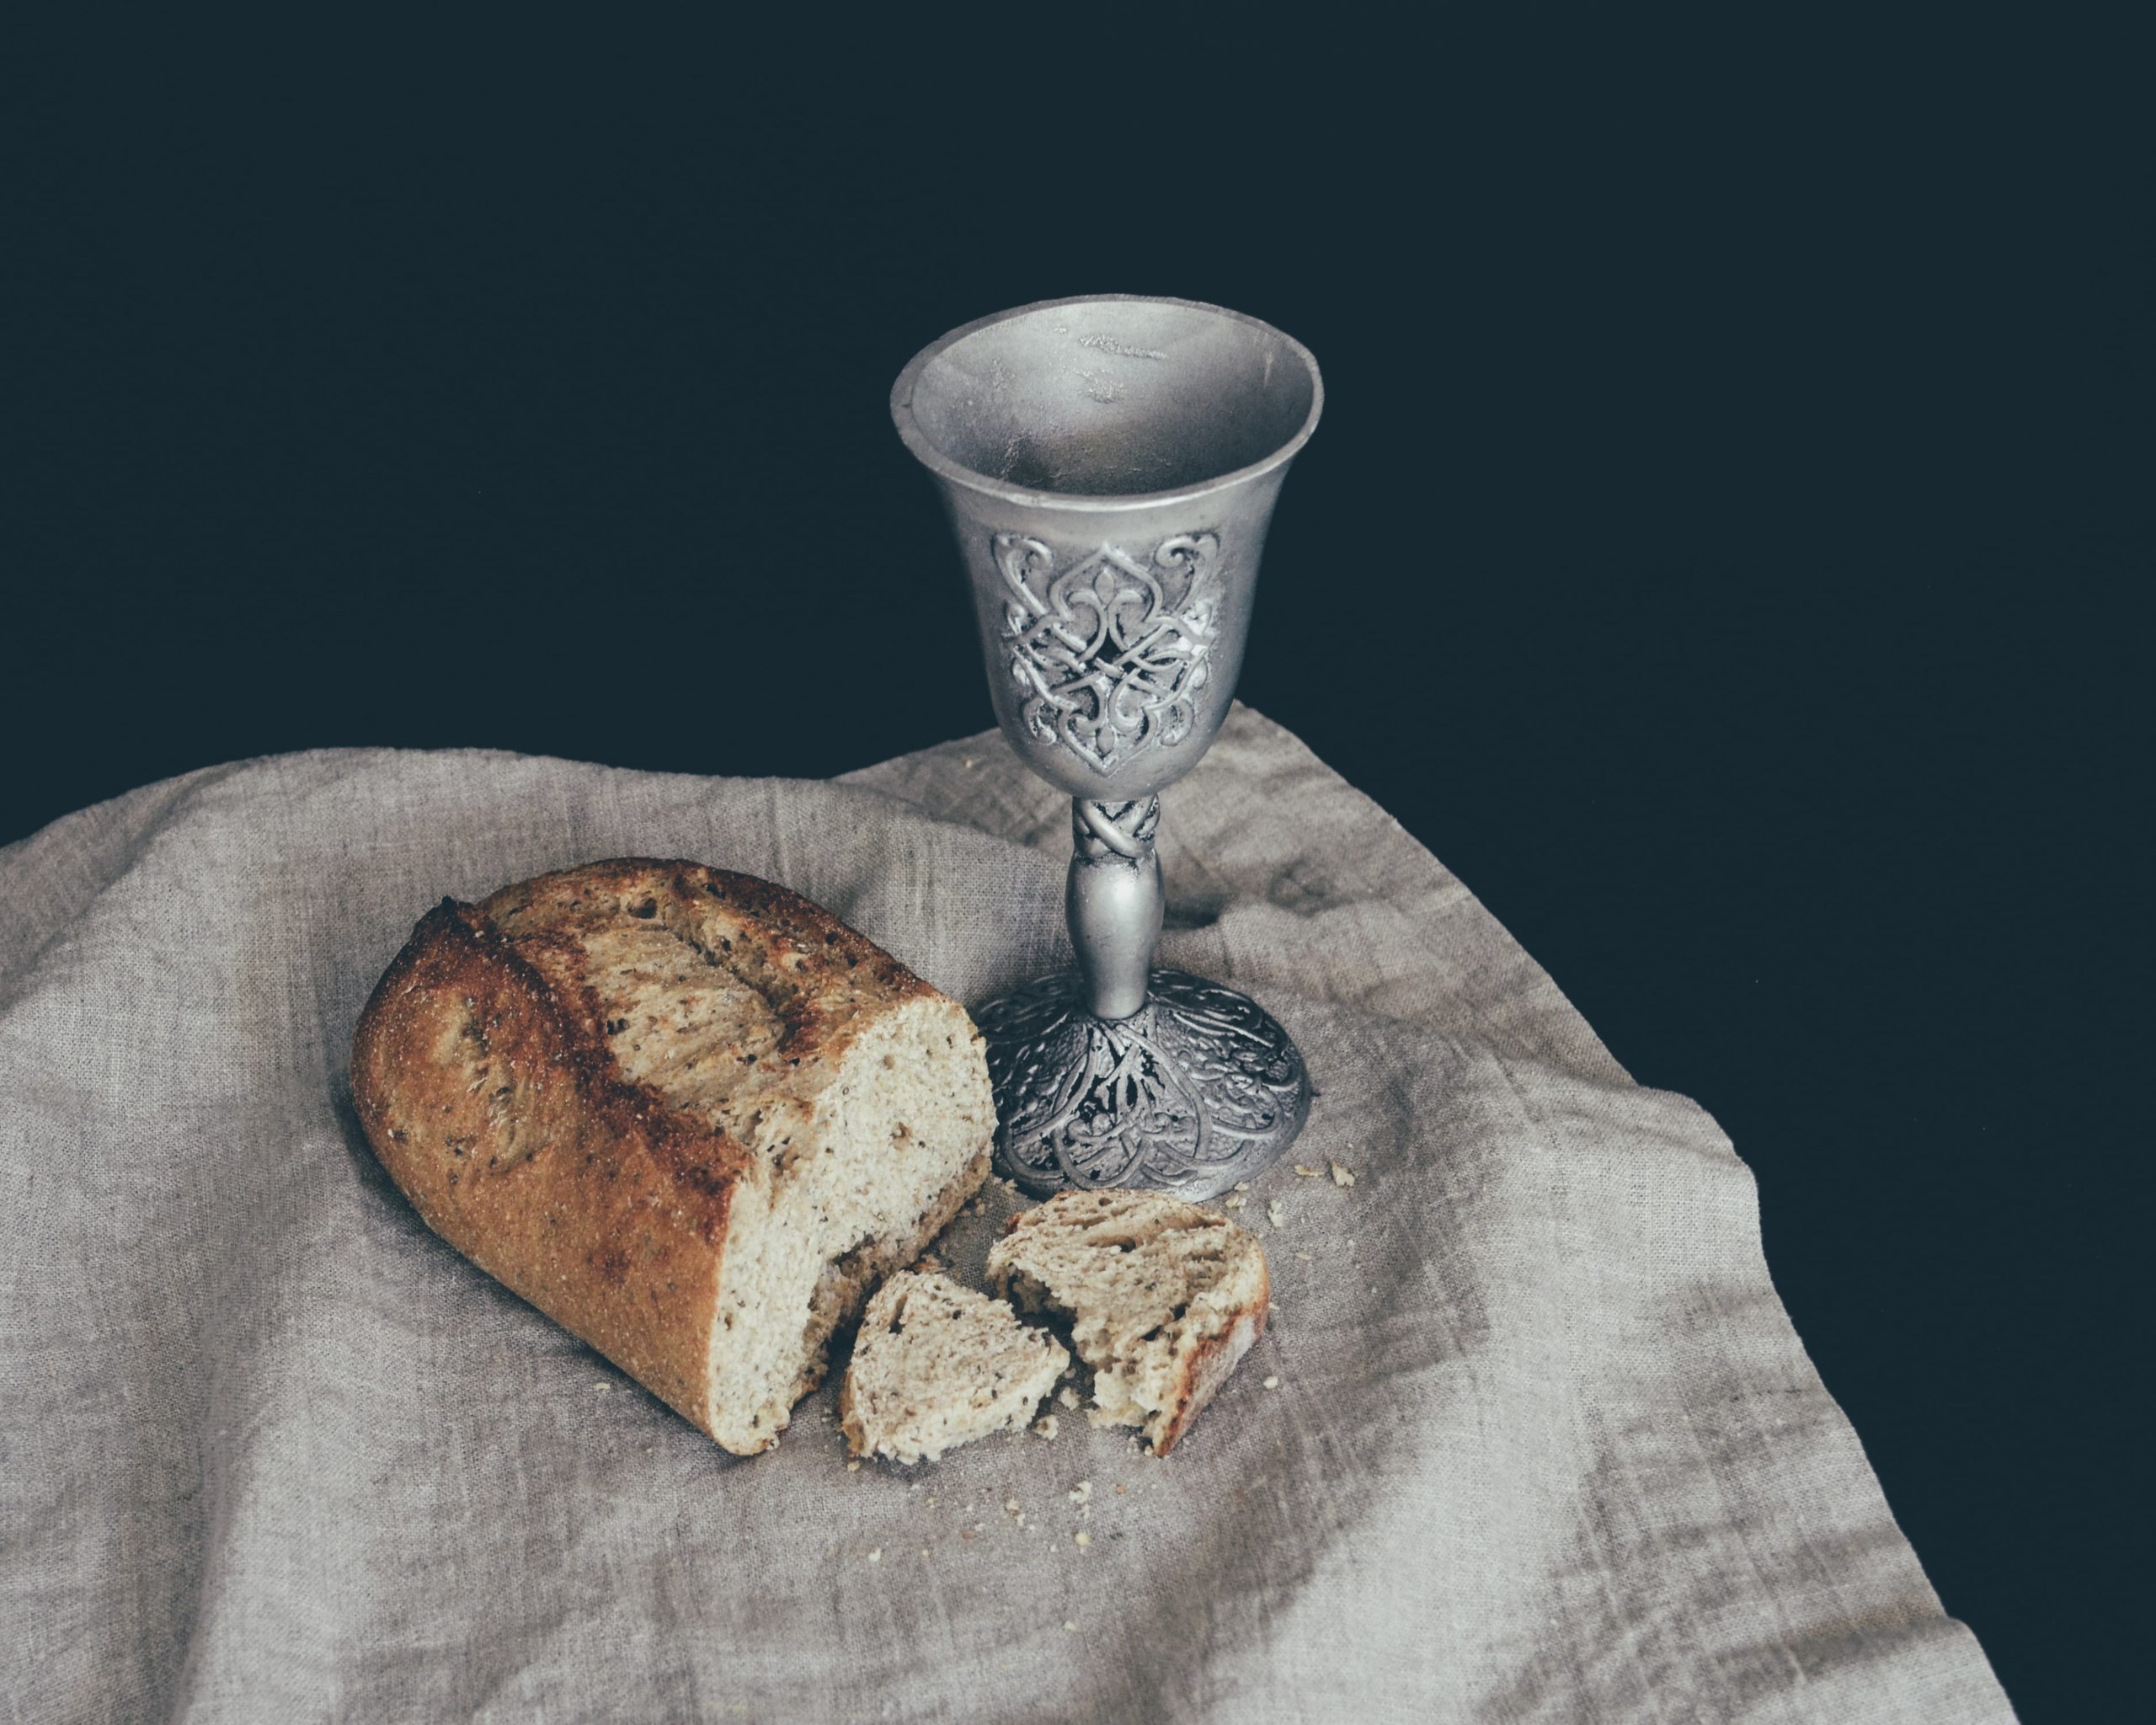 The Lord's Supper | Gospel Reformation Network
